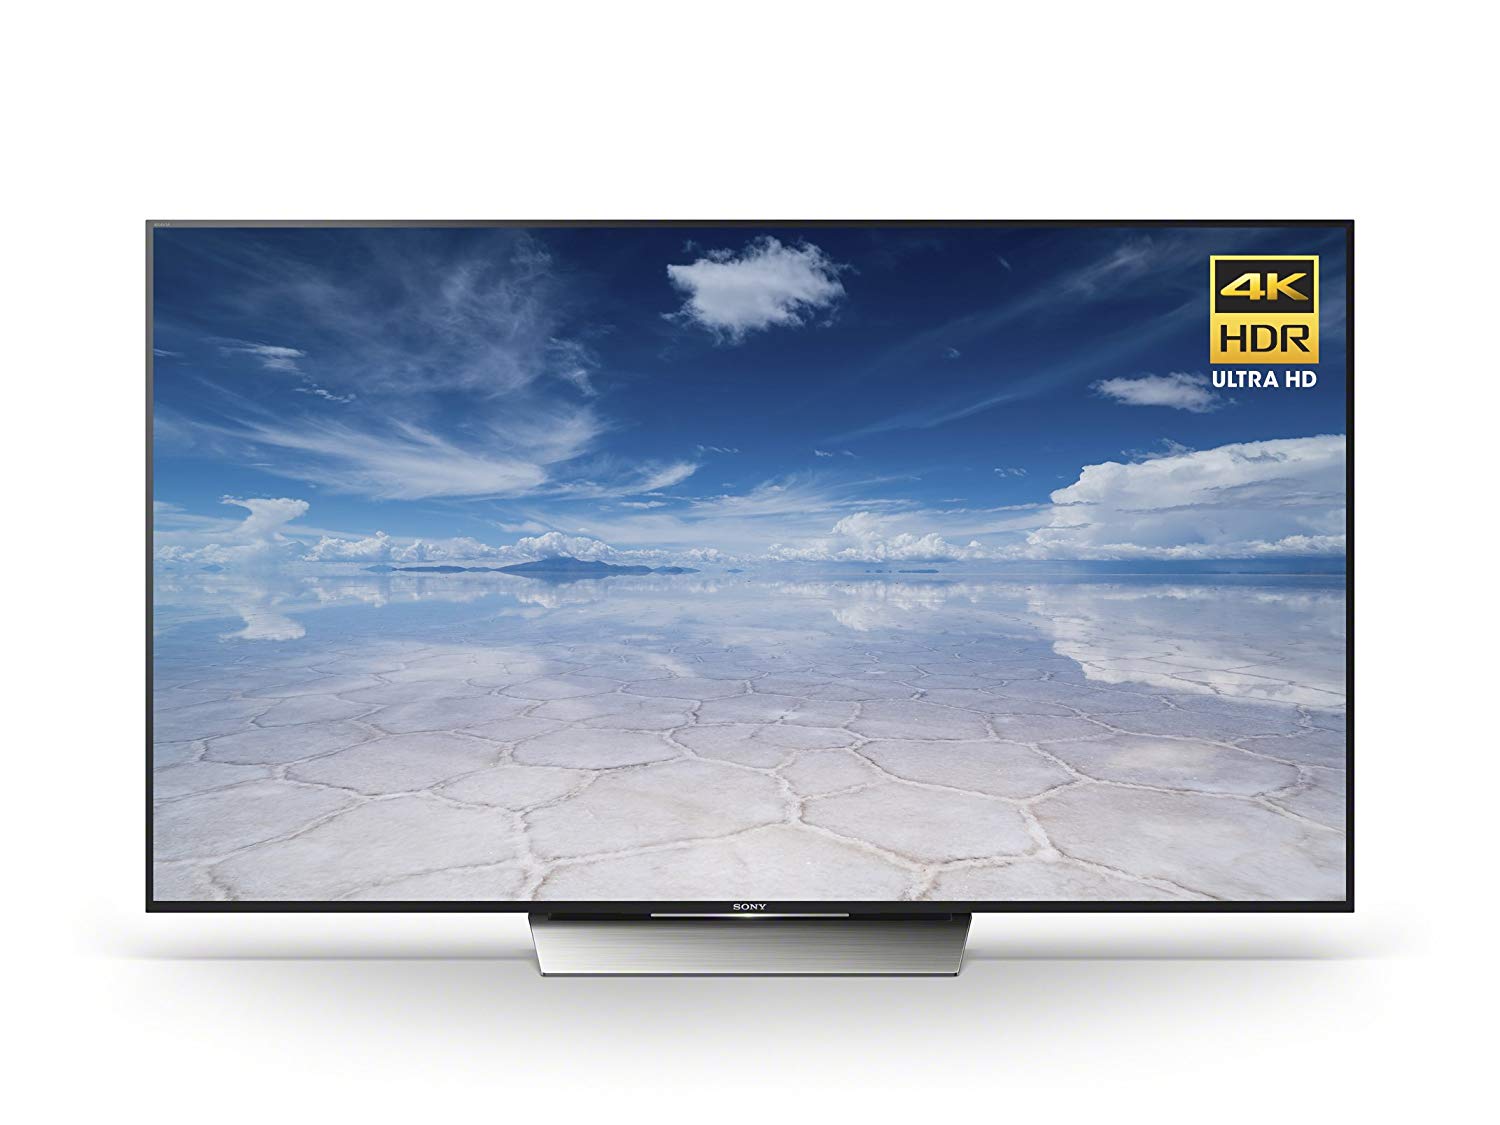 An image related to Sony XBR-55X850D 55-Inch HDR 4K LED 120Hz TV with Sony Motionflow XR